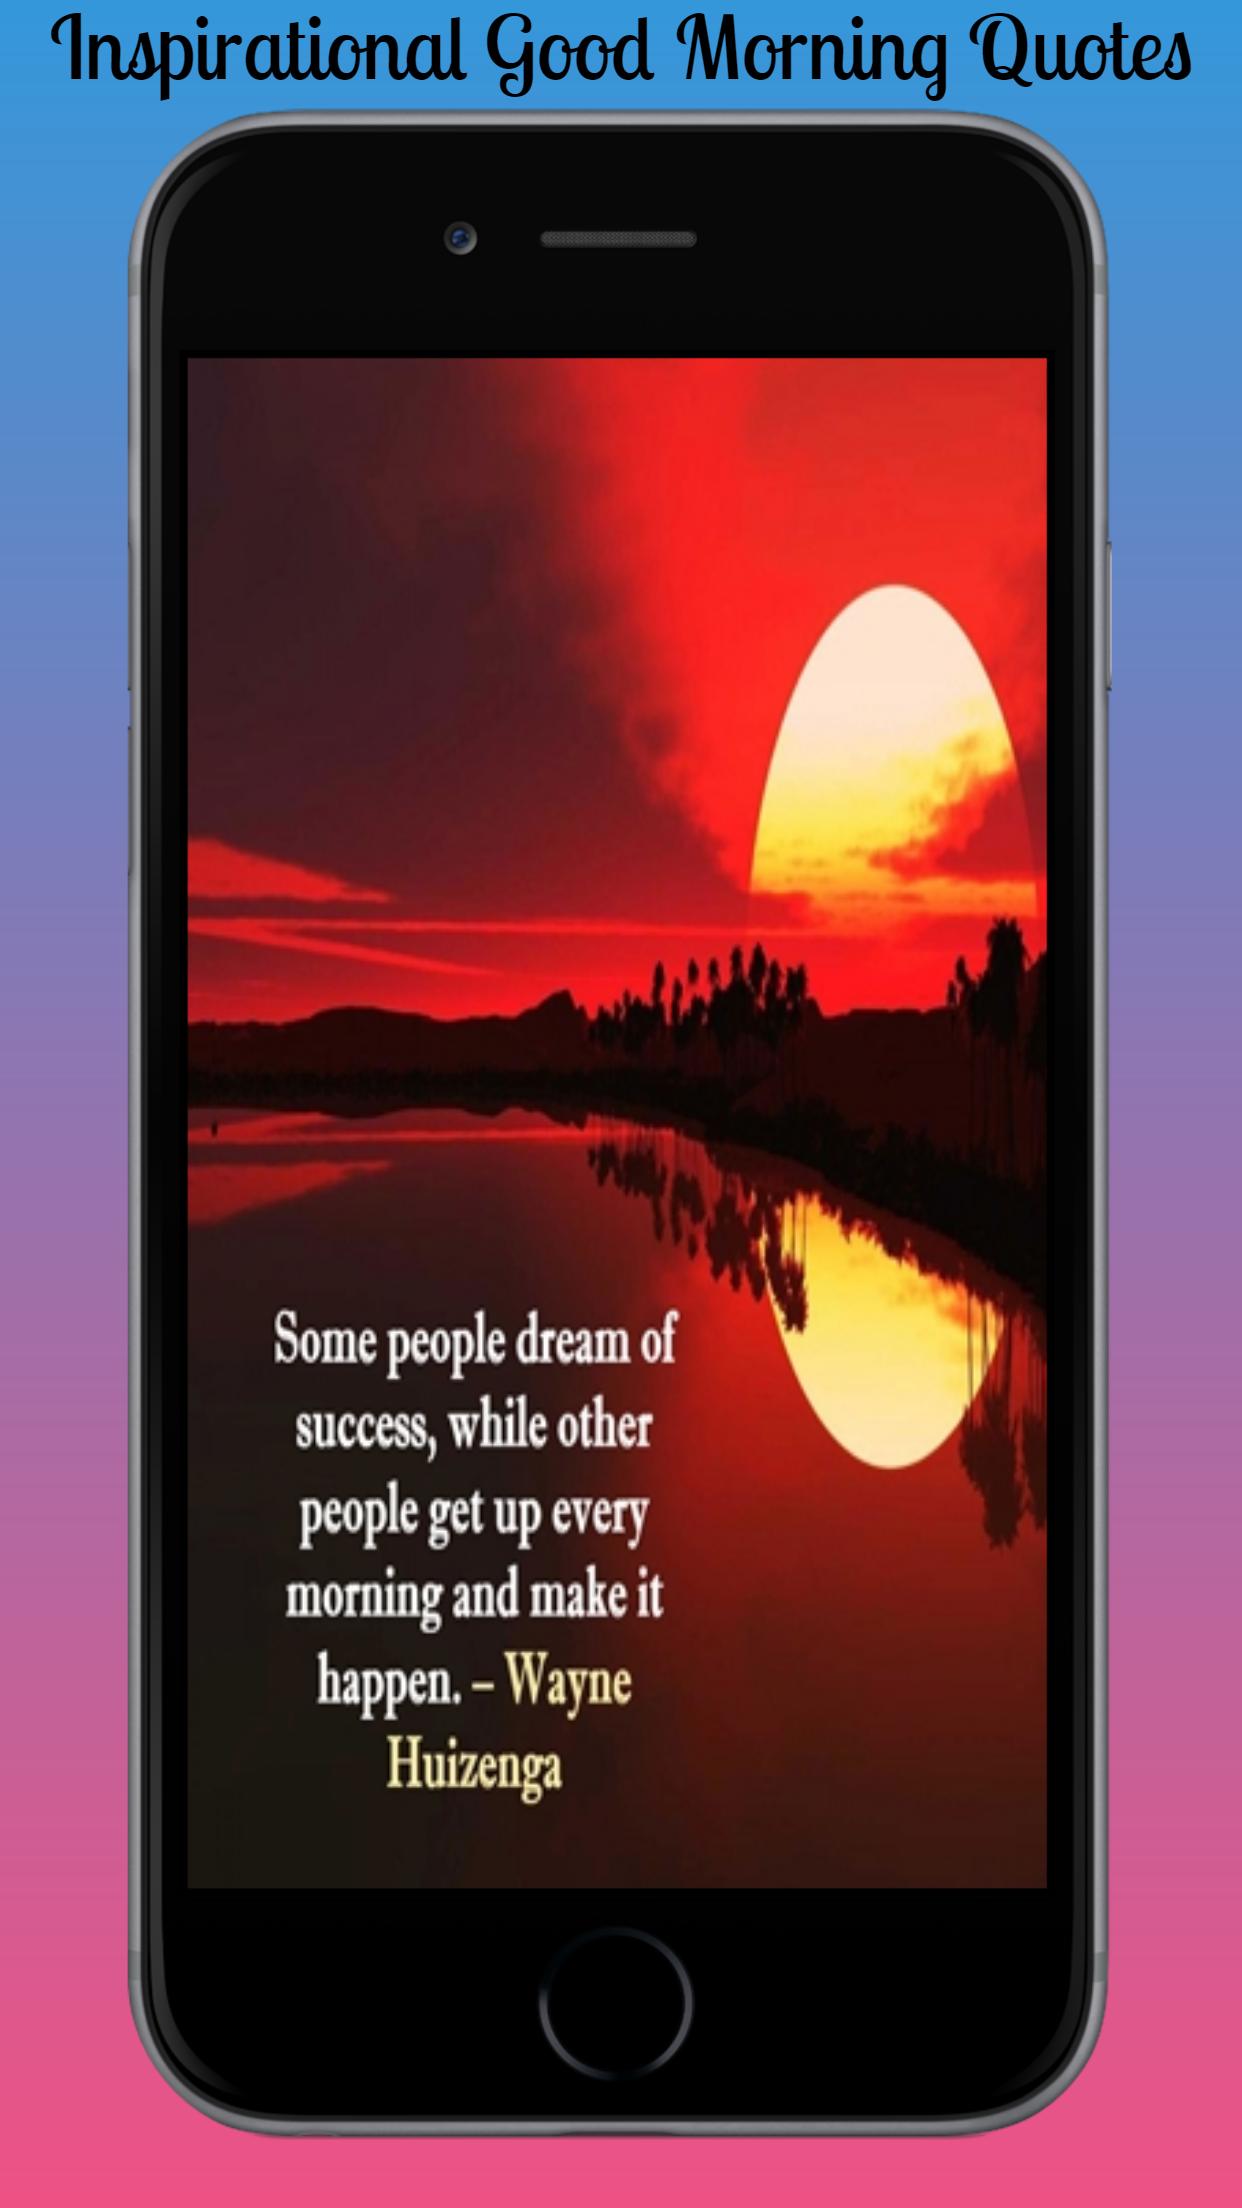 Inspirational Good Morning Messages,Wishes&Quotes 2.0 Screenshot 2